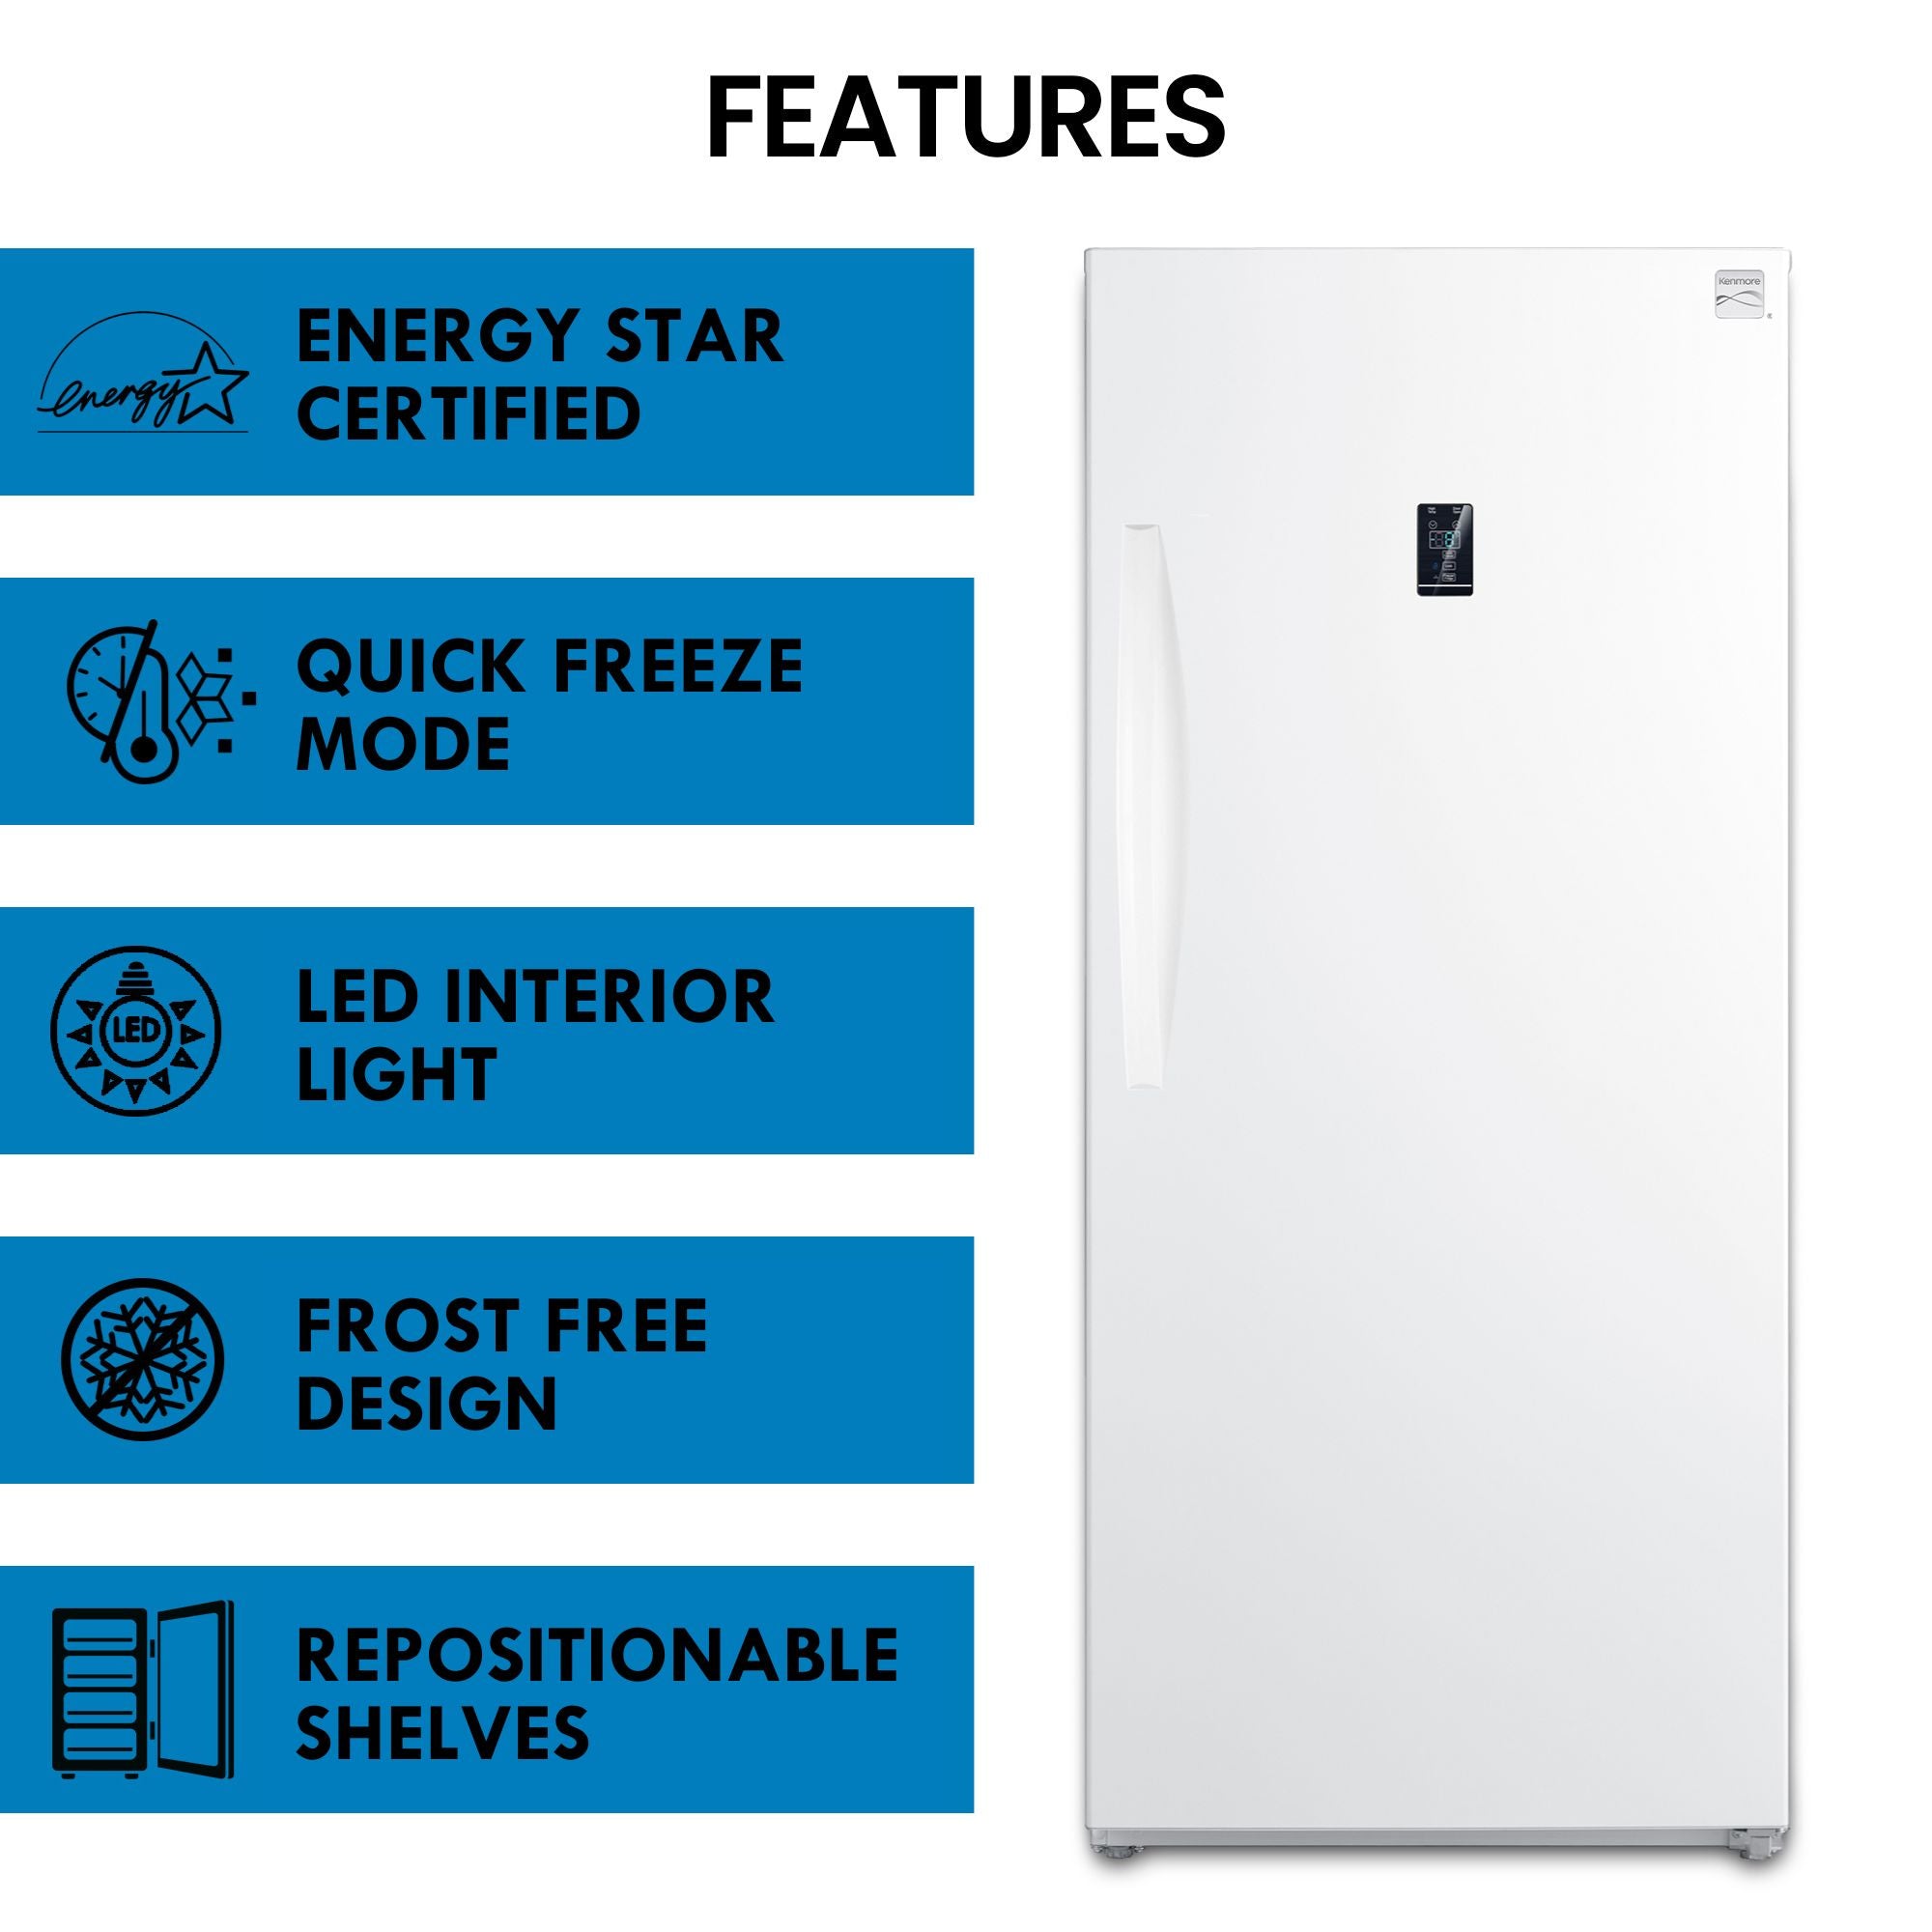 Kenmore upright convertible fridge freezer on a white background with features listed to the left: Energy Star certified; quick freeze mode; LED interior light; frost free design; repositionable shelves